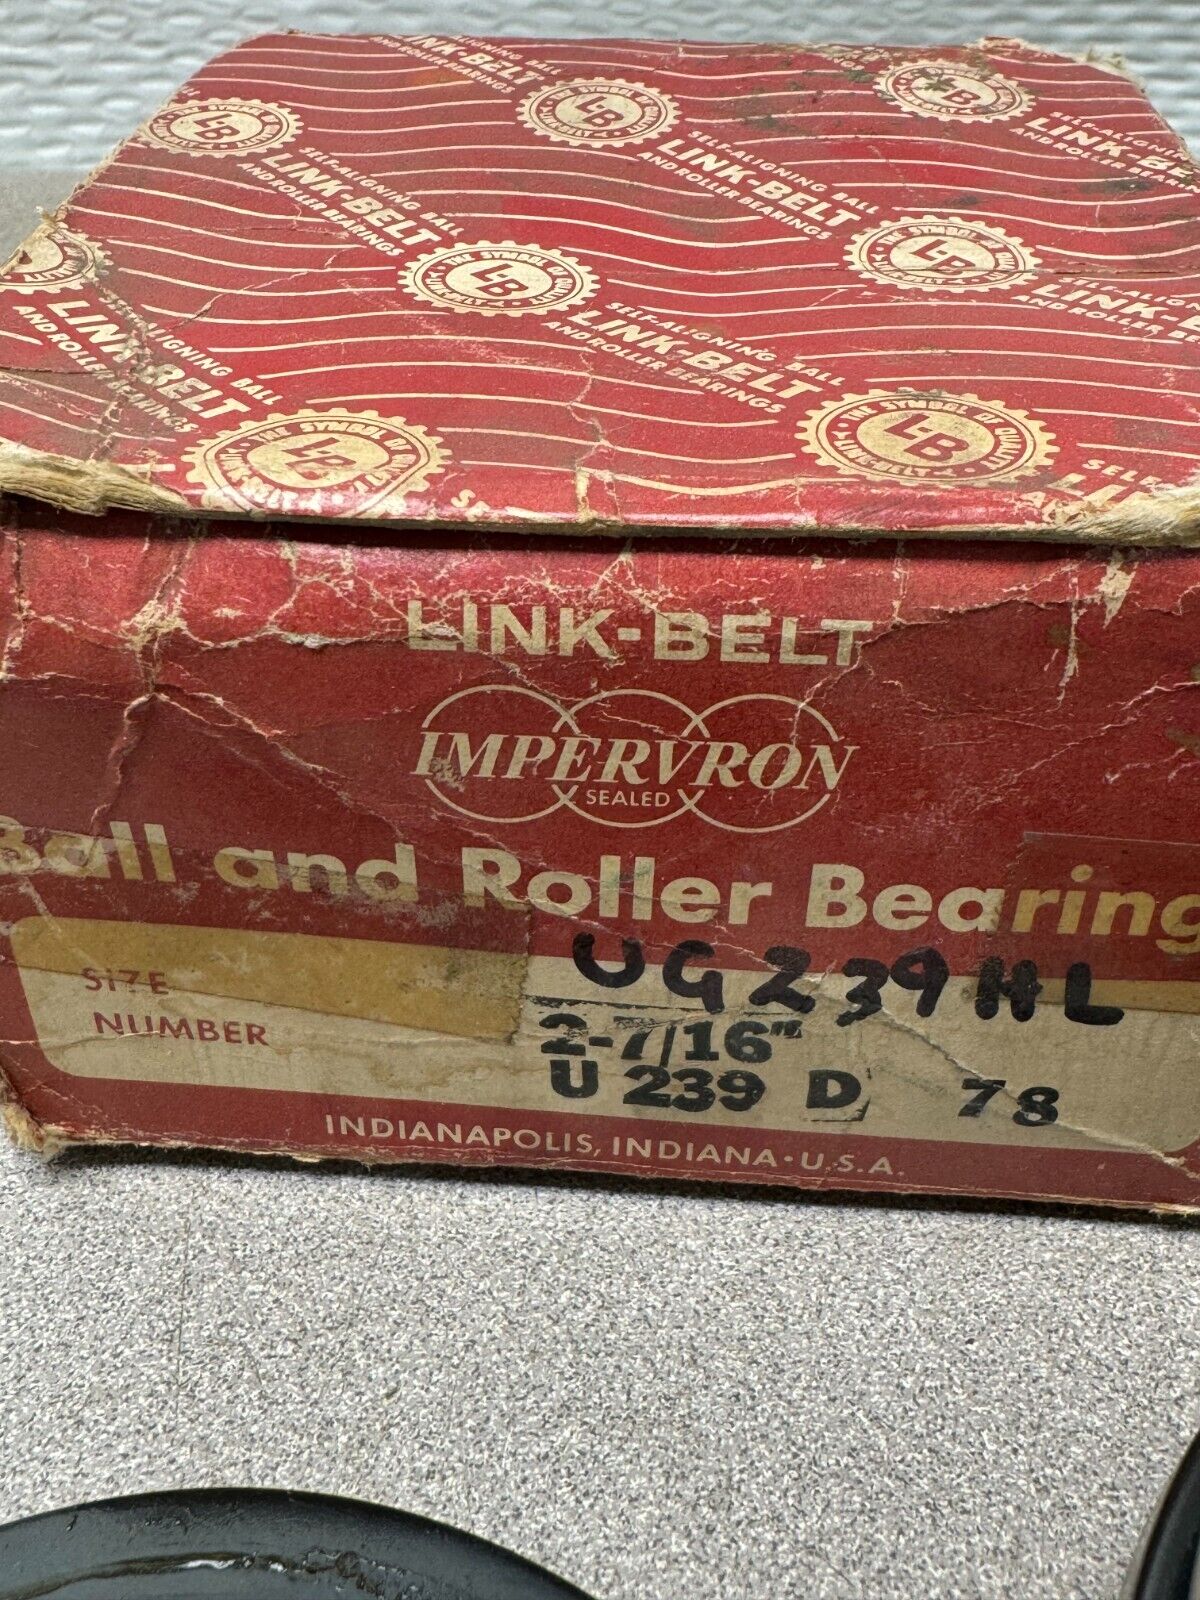 NEW IN BOX LINK-BELT BALL AND ROLLER BEARING 2-7/16" U 239 D 78